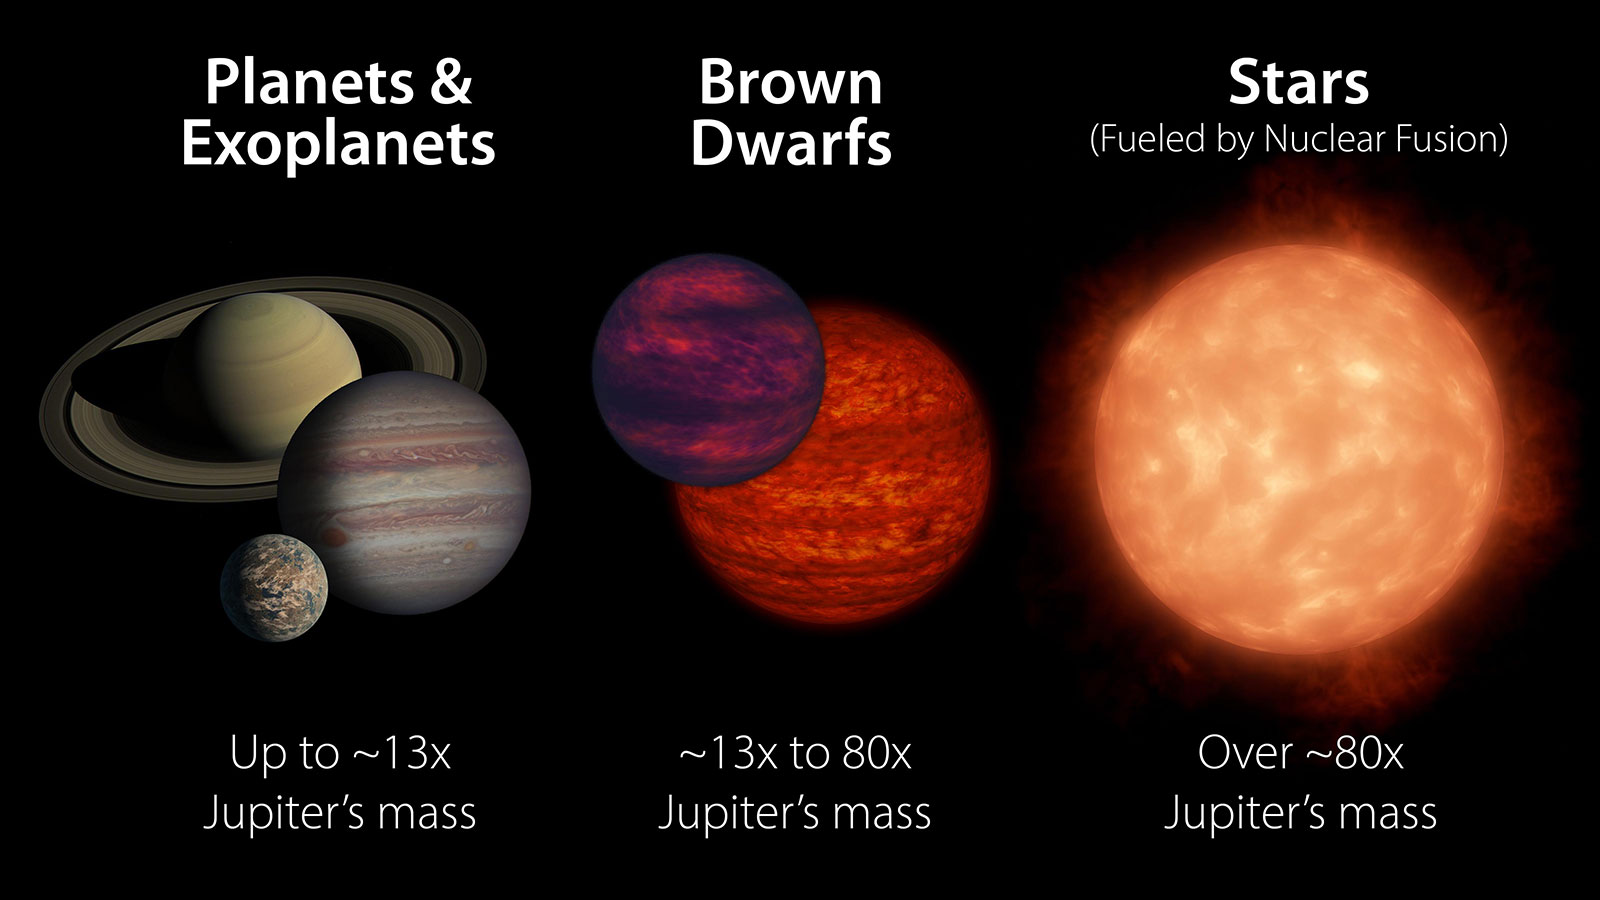 Brown dwarfs share certain characteristics with both stars and planets